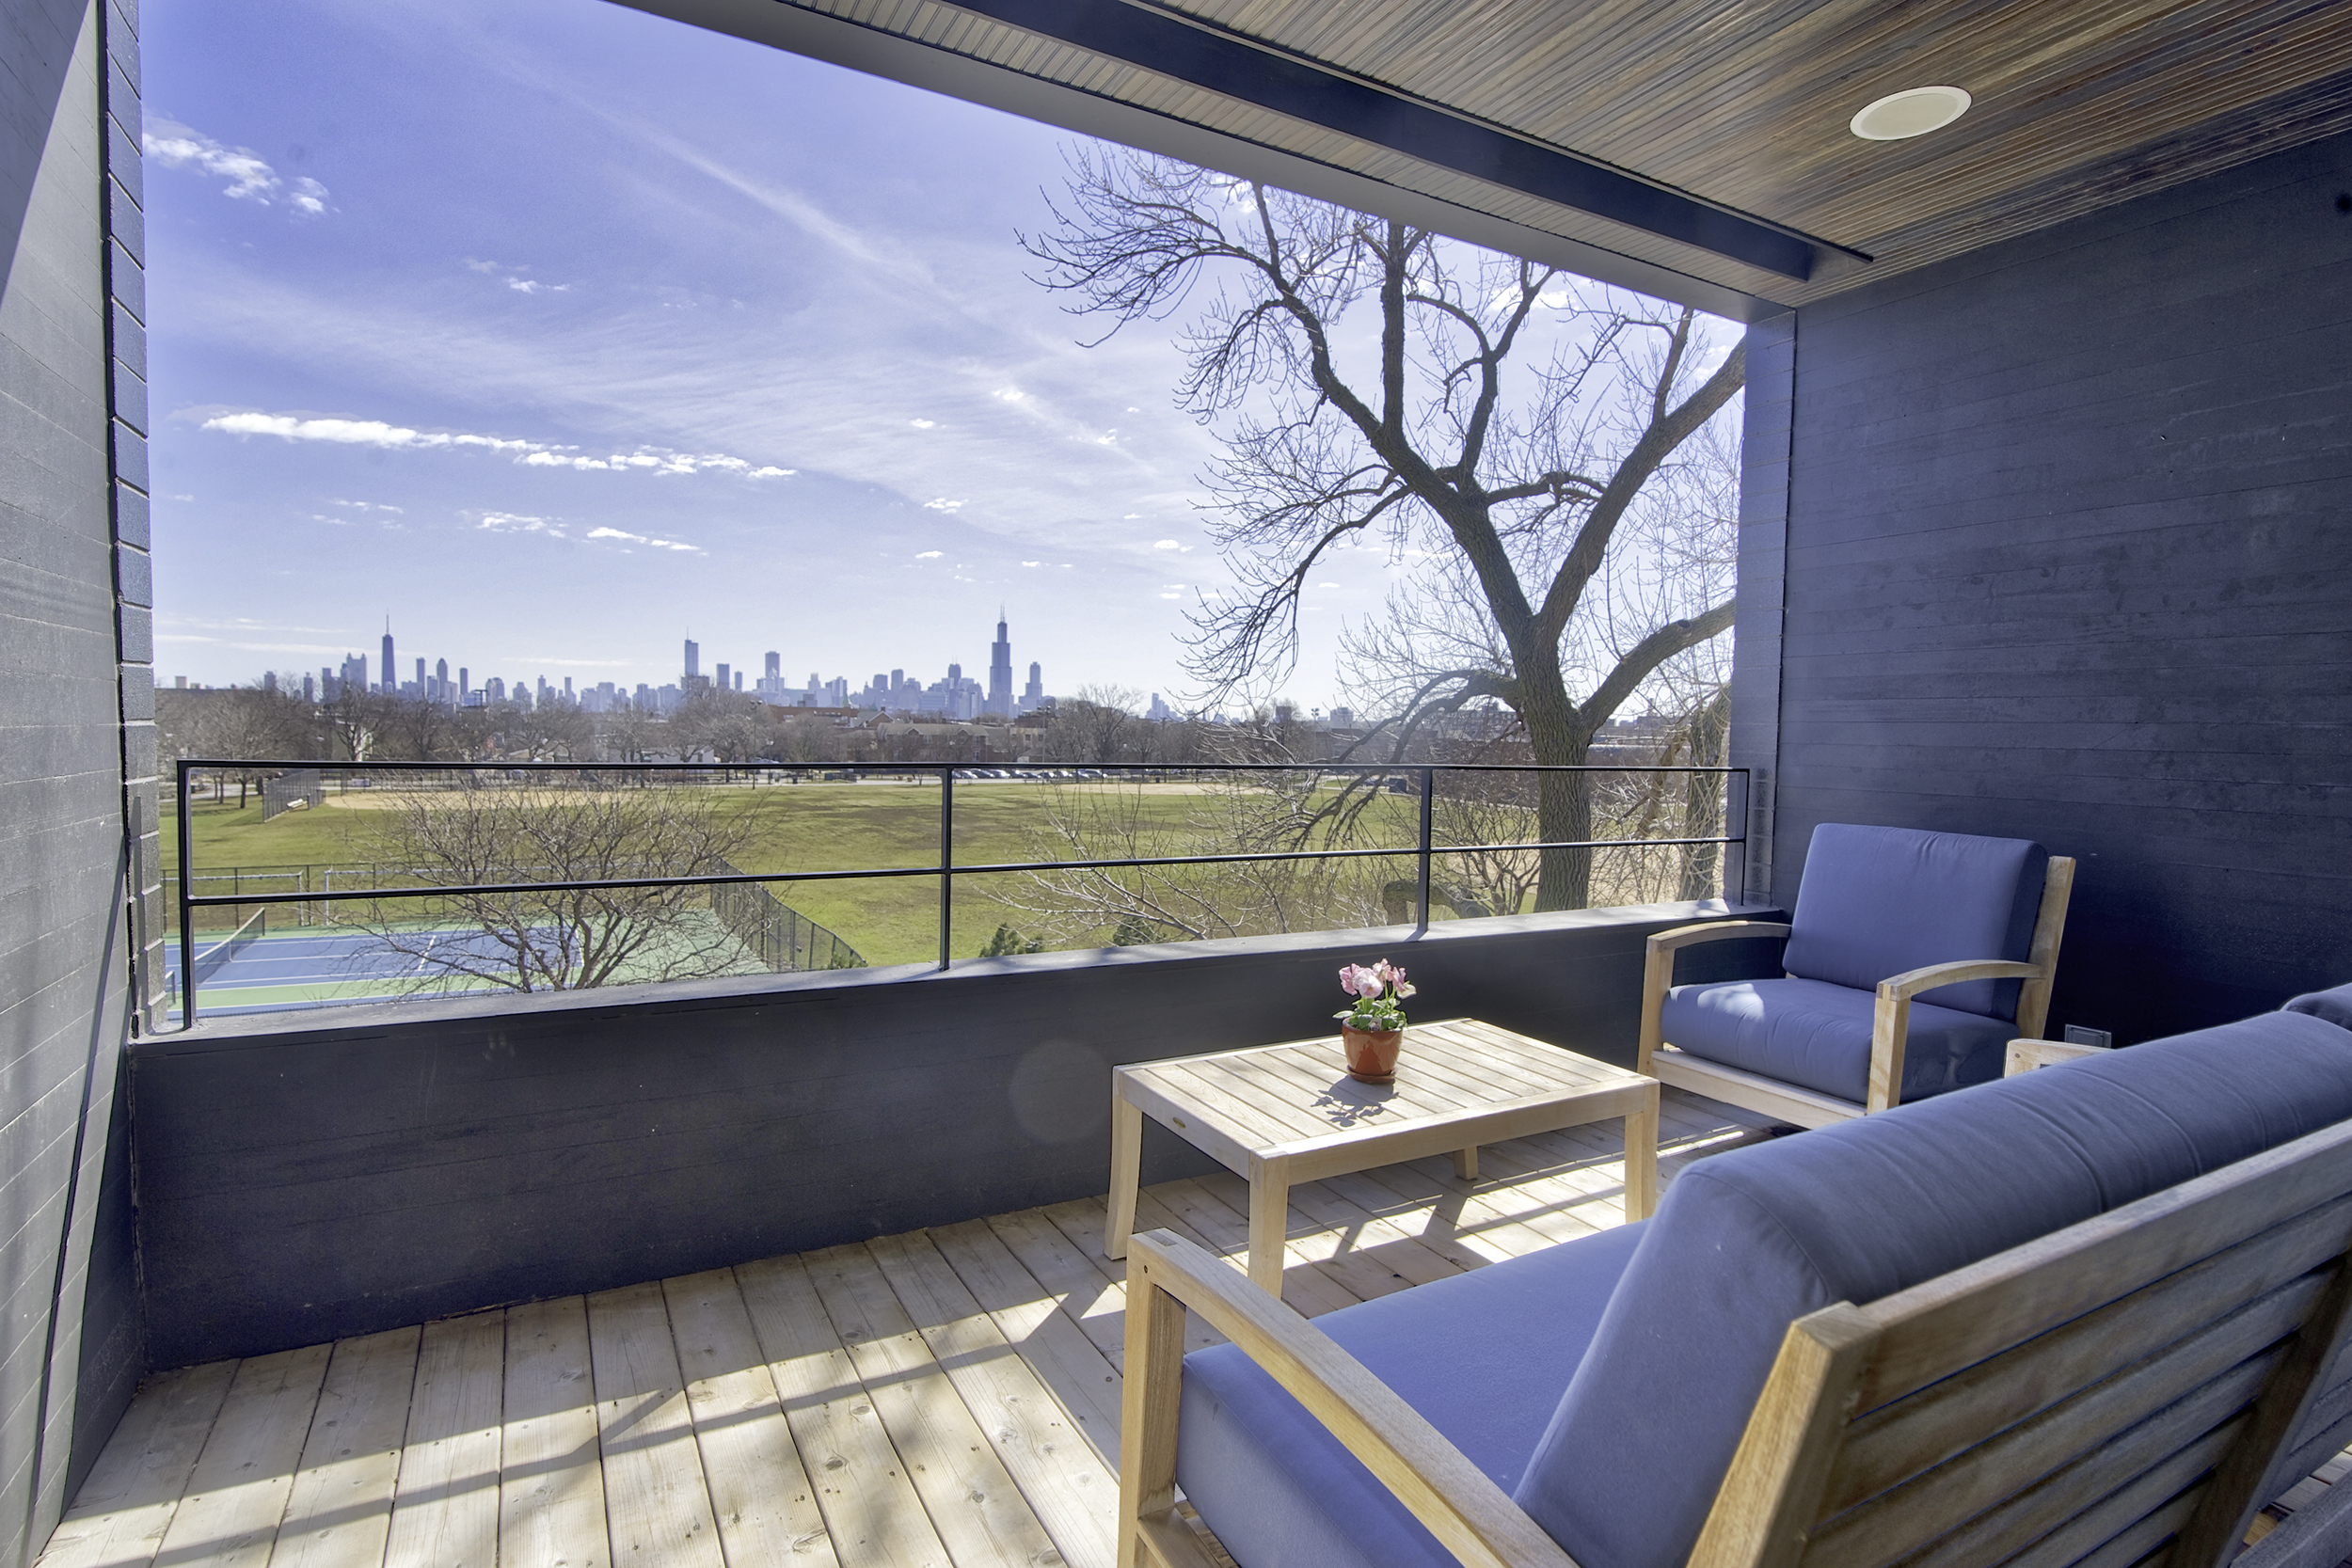  Nice HDR view of the Chicago skyline from enclosed west side balcony. 